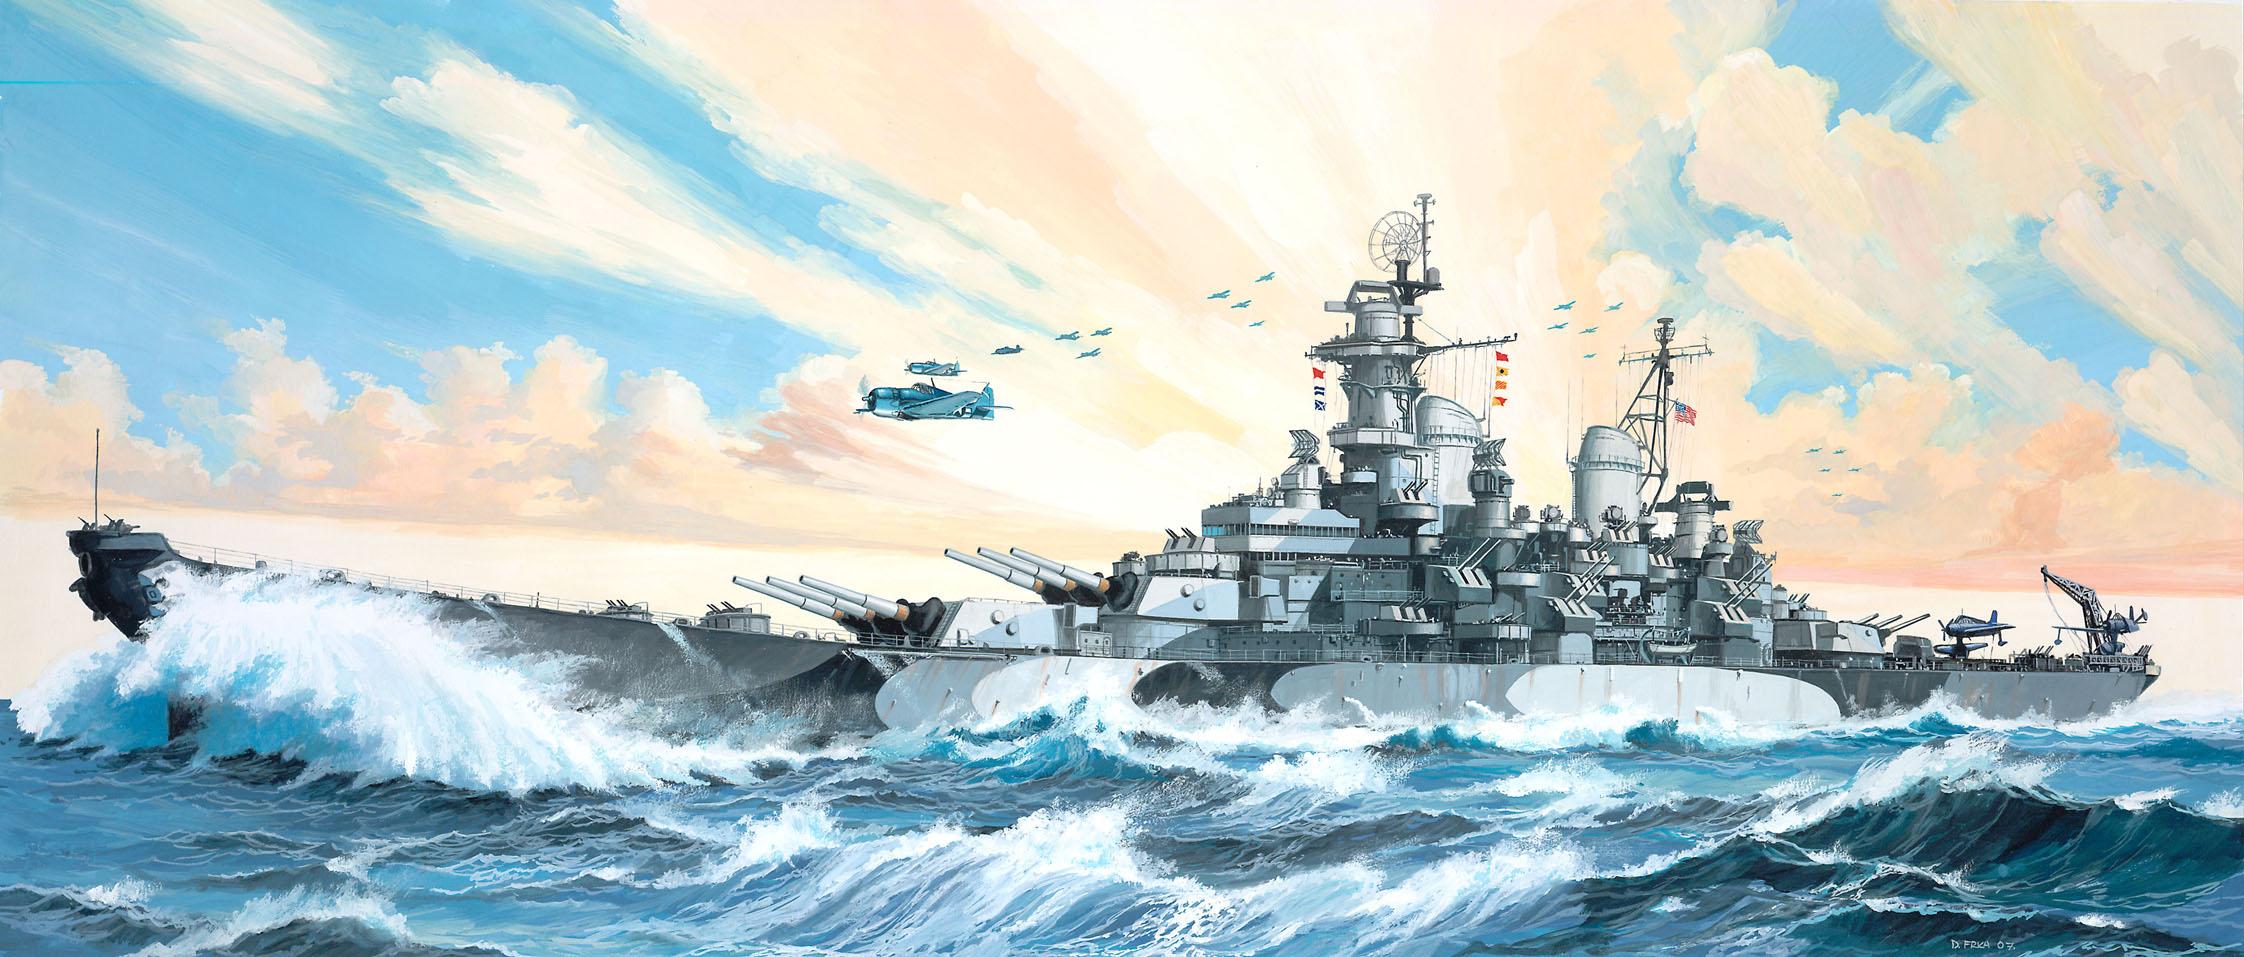 General 2244x957 warship sea aircraft flying sky army military waves water clouds artwork flag military vehicle